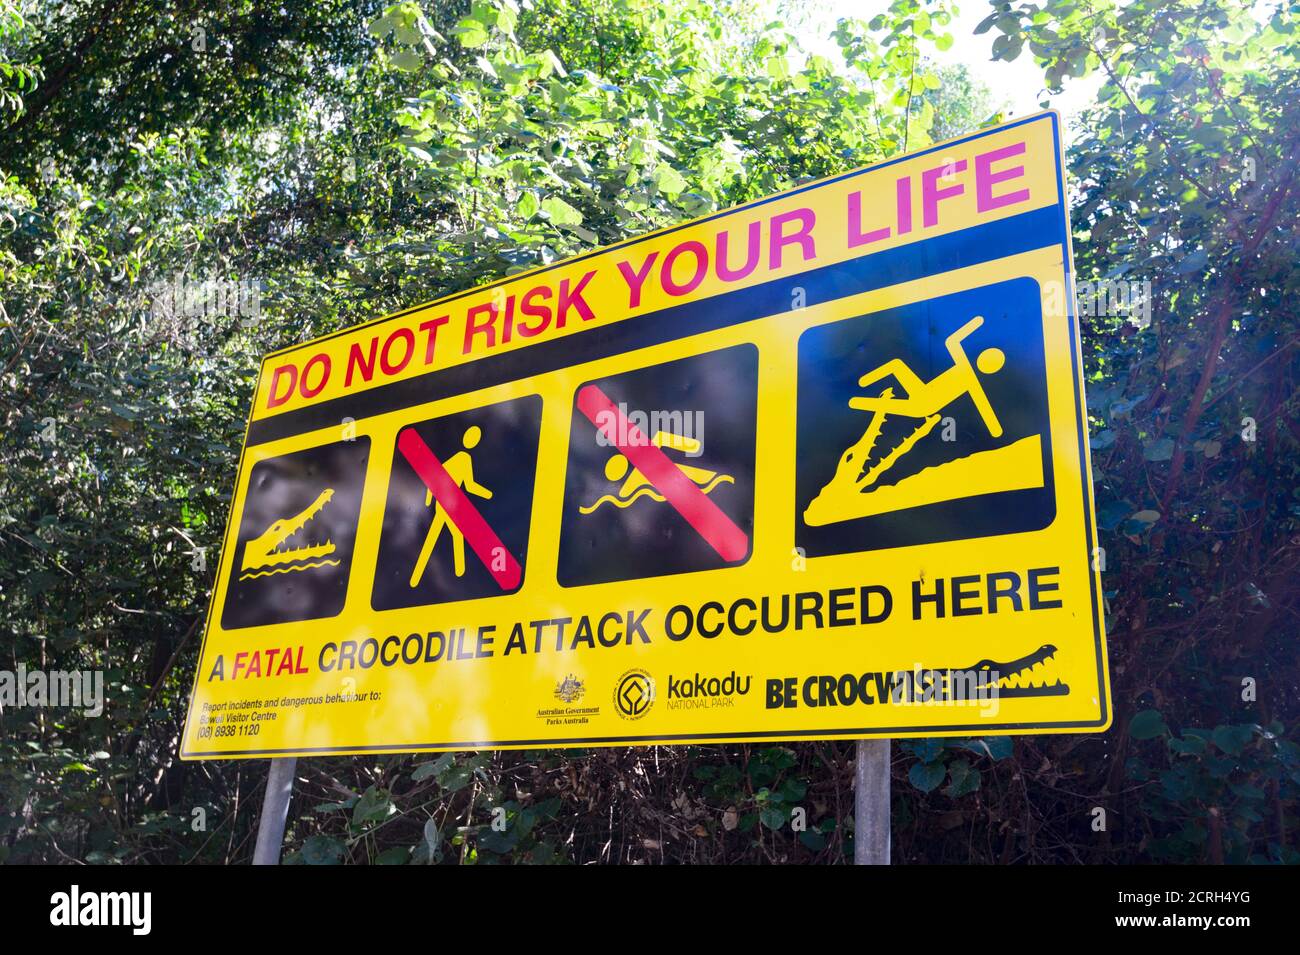 Warning safety sign against crocodiles in the East Alligator River, Kakadu National Park, Northern Territory, NT, Australia Stock Photo